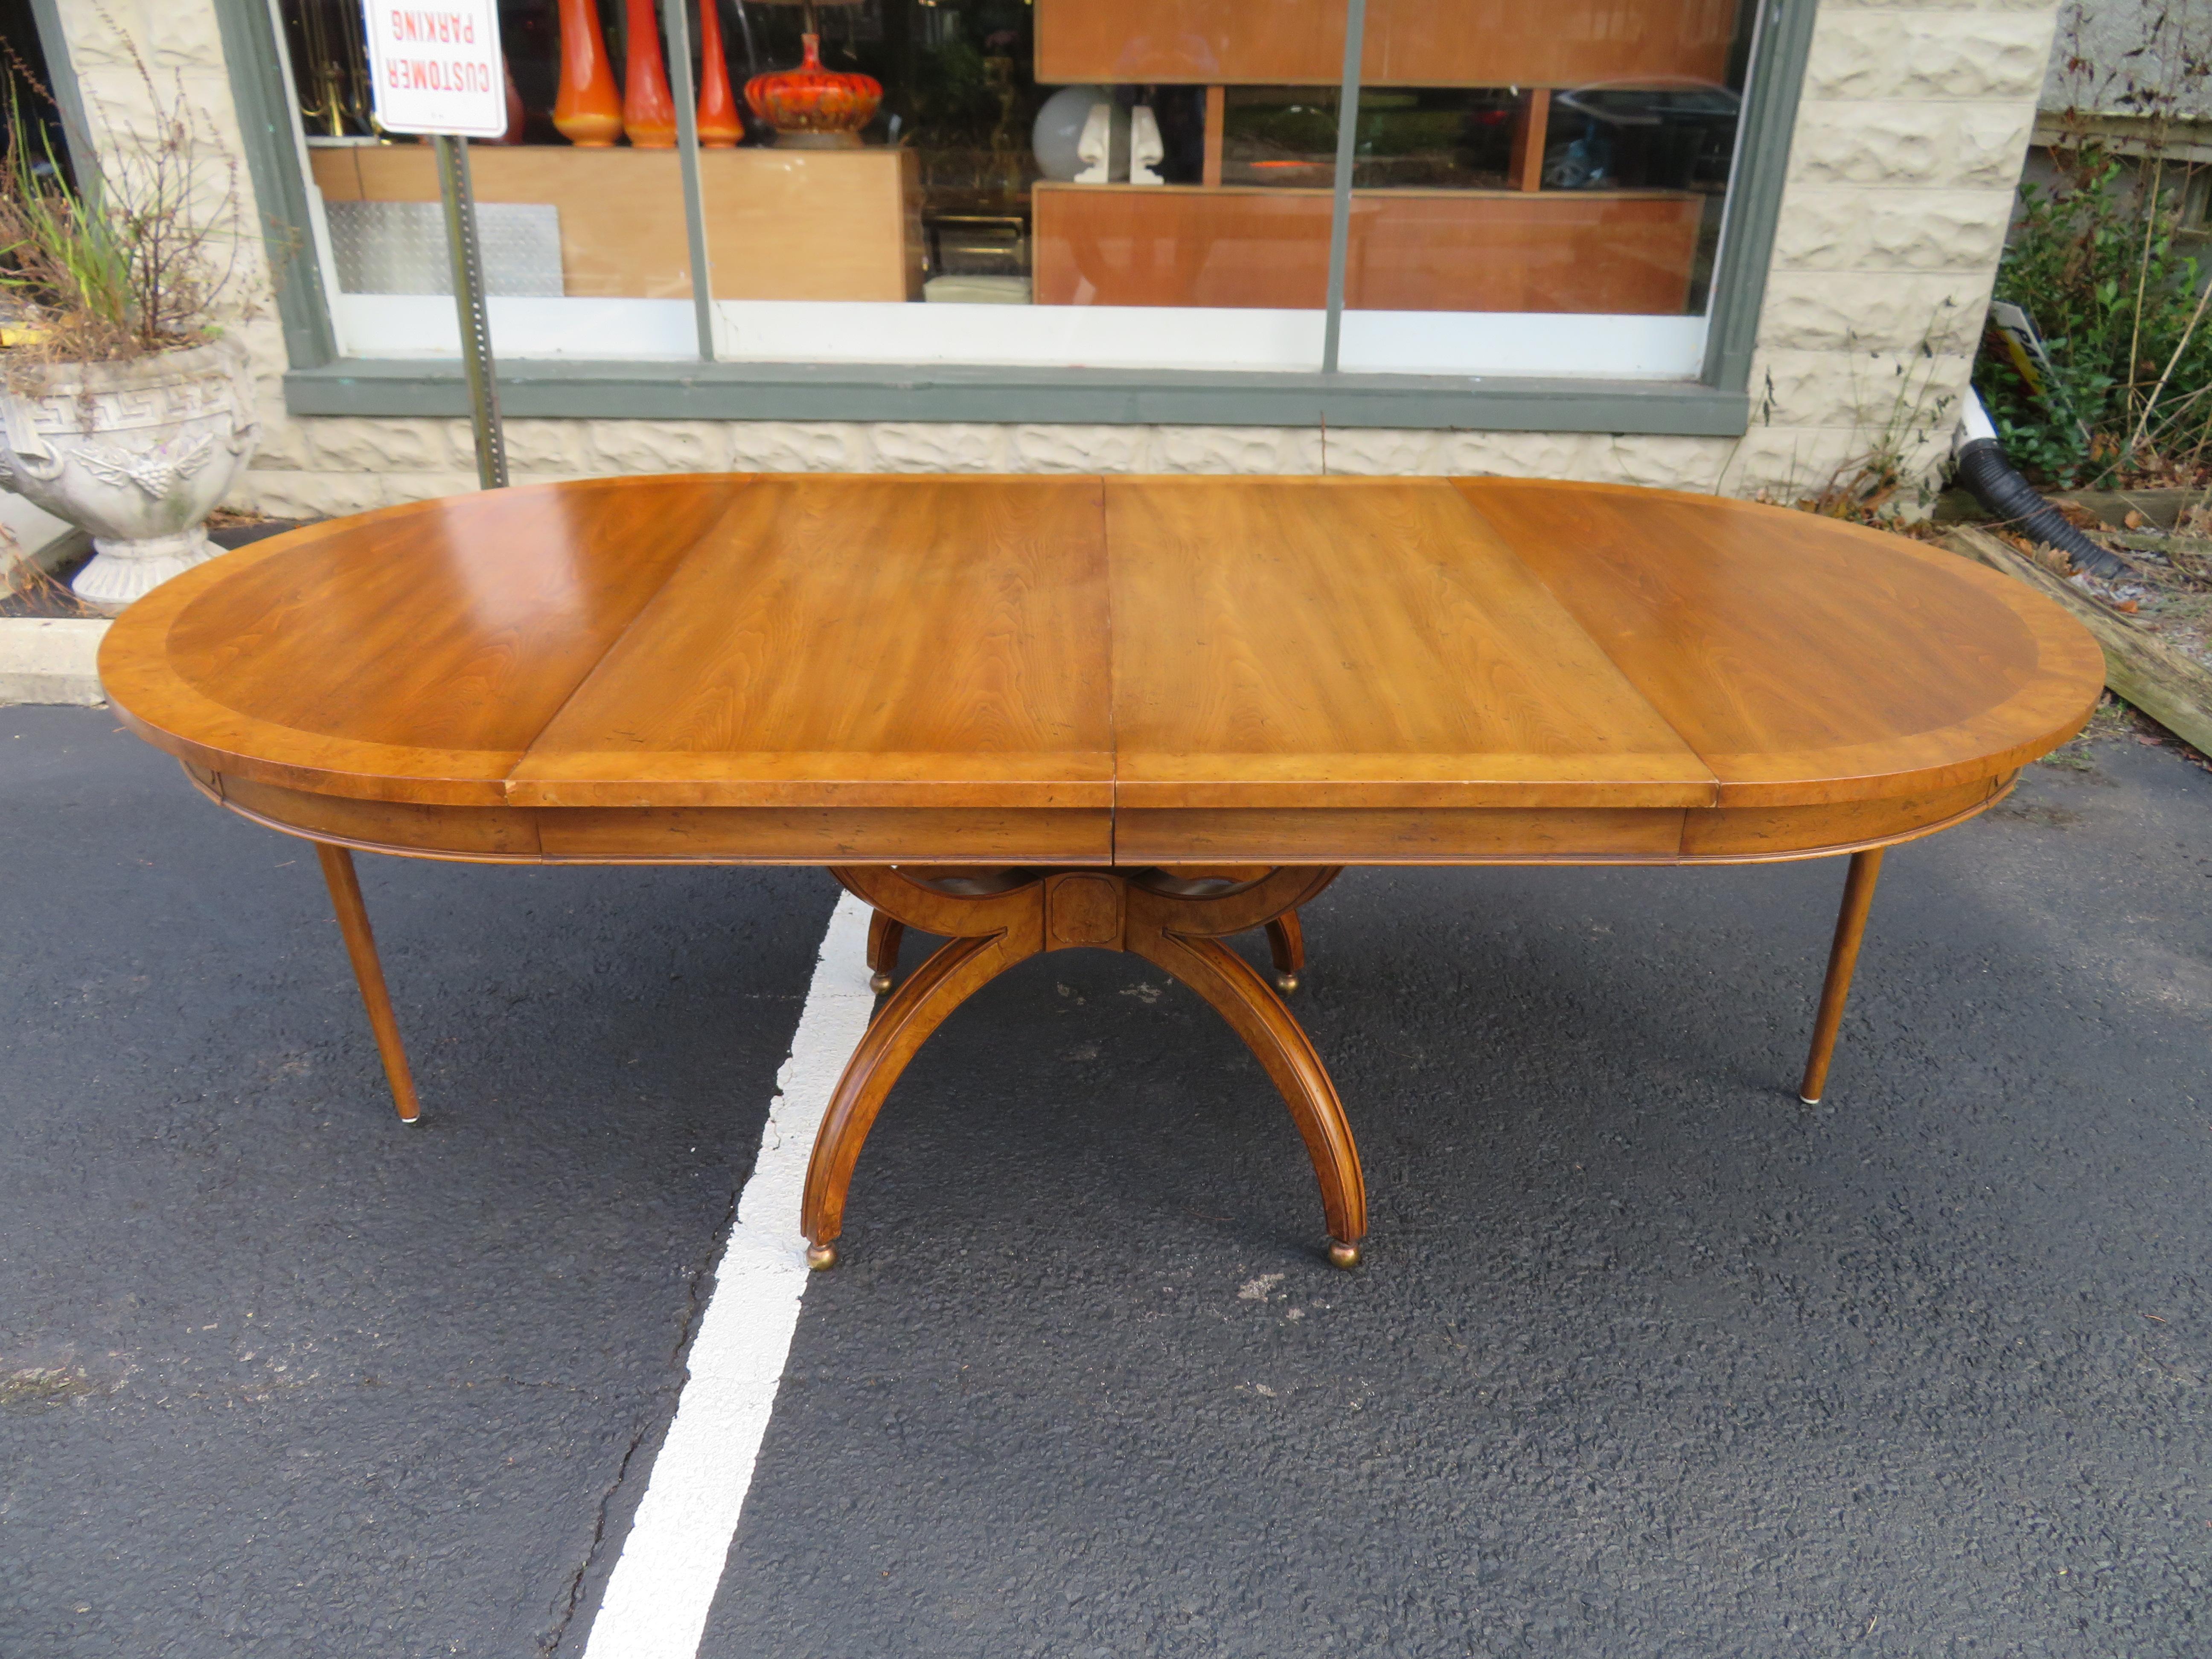 Fabulous William Doezema Biebermeier Amboyna and walnut dining table for Mastercraft. We love the round shaped top along with the cool brass sphere feet. This table has 2 good size leaves-over 20